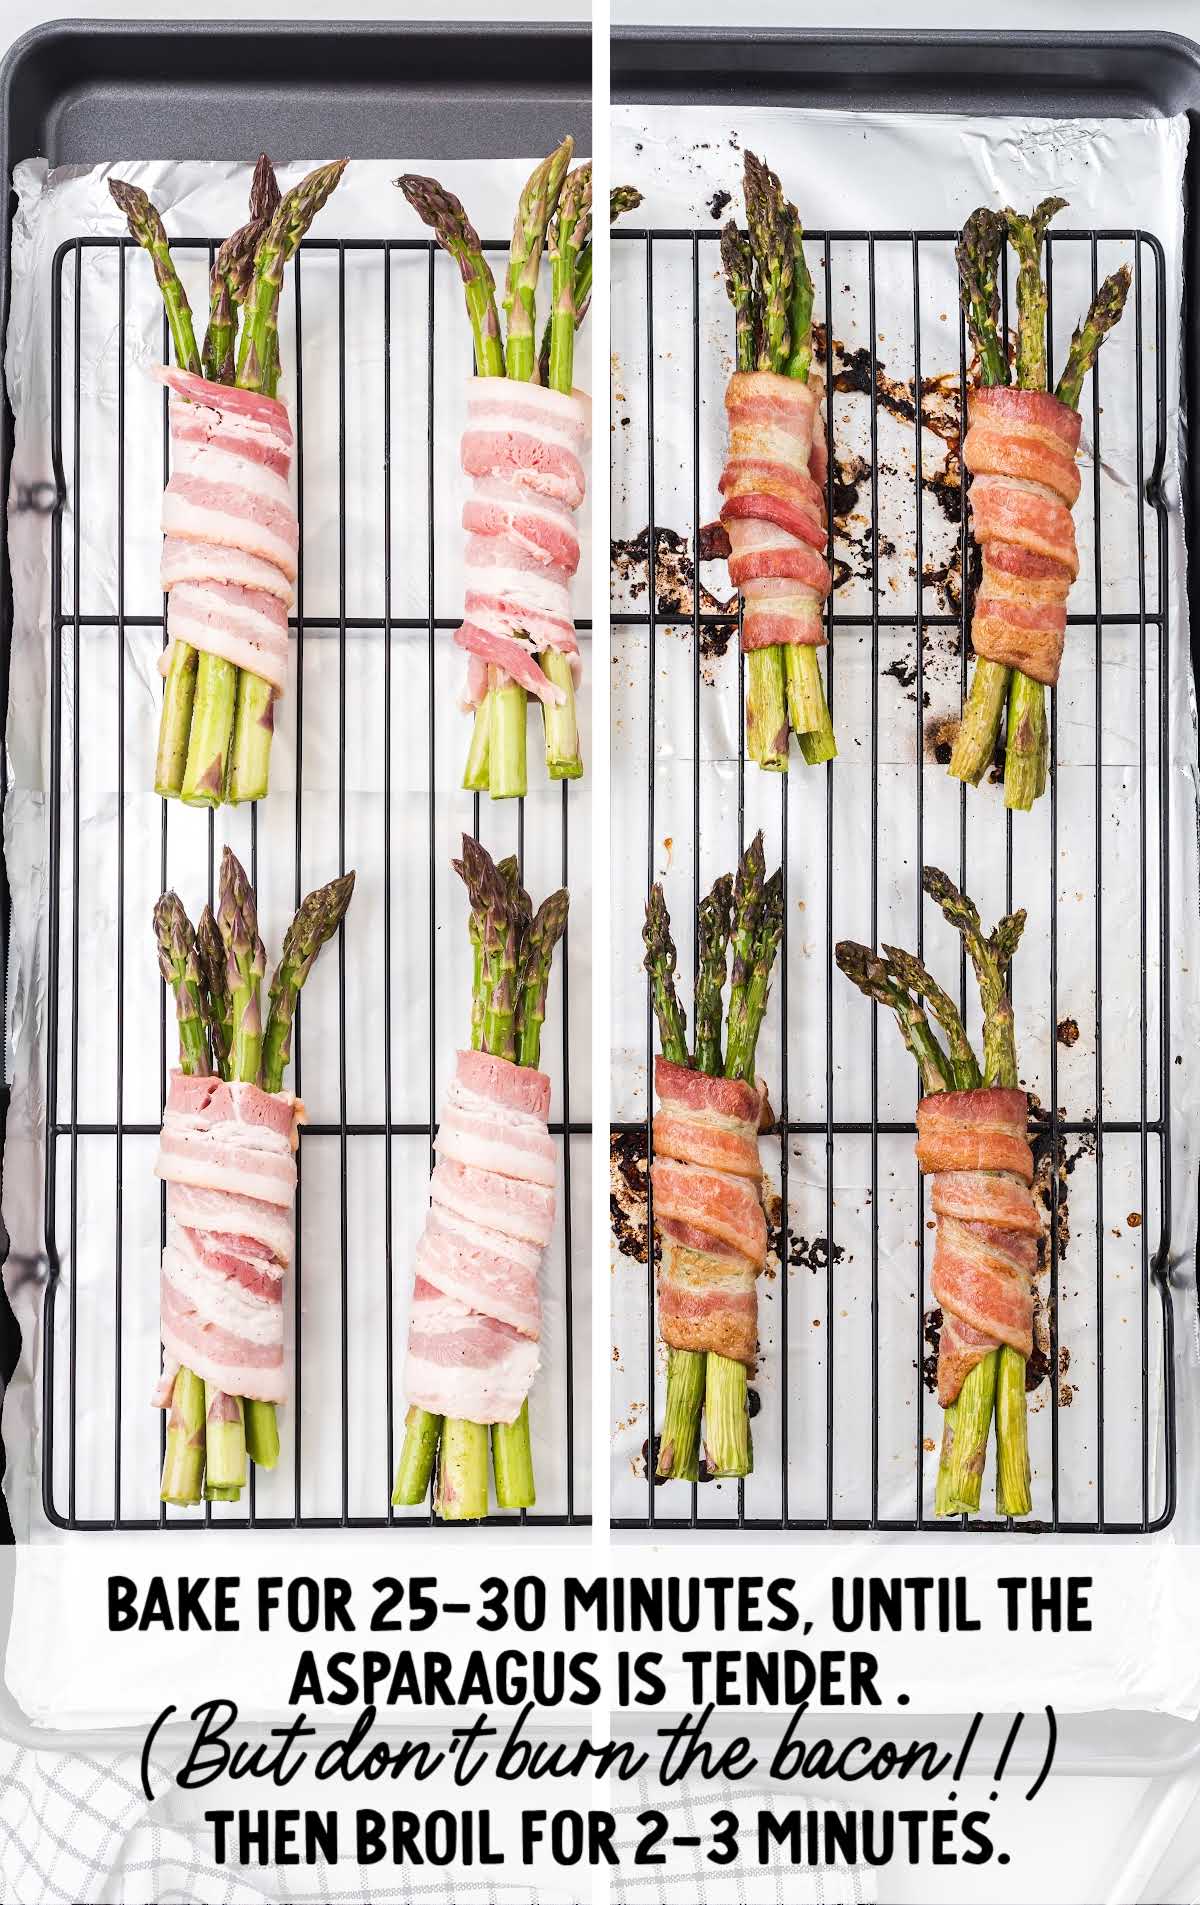 Bacon Wrapped Asparagus baked and then broiled